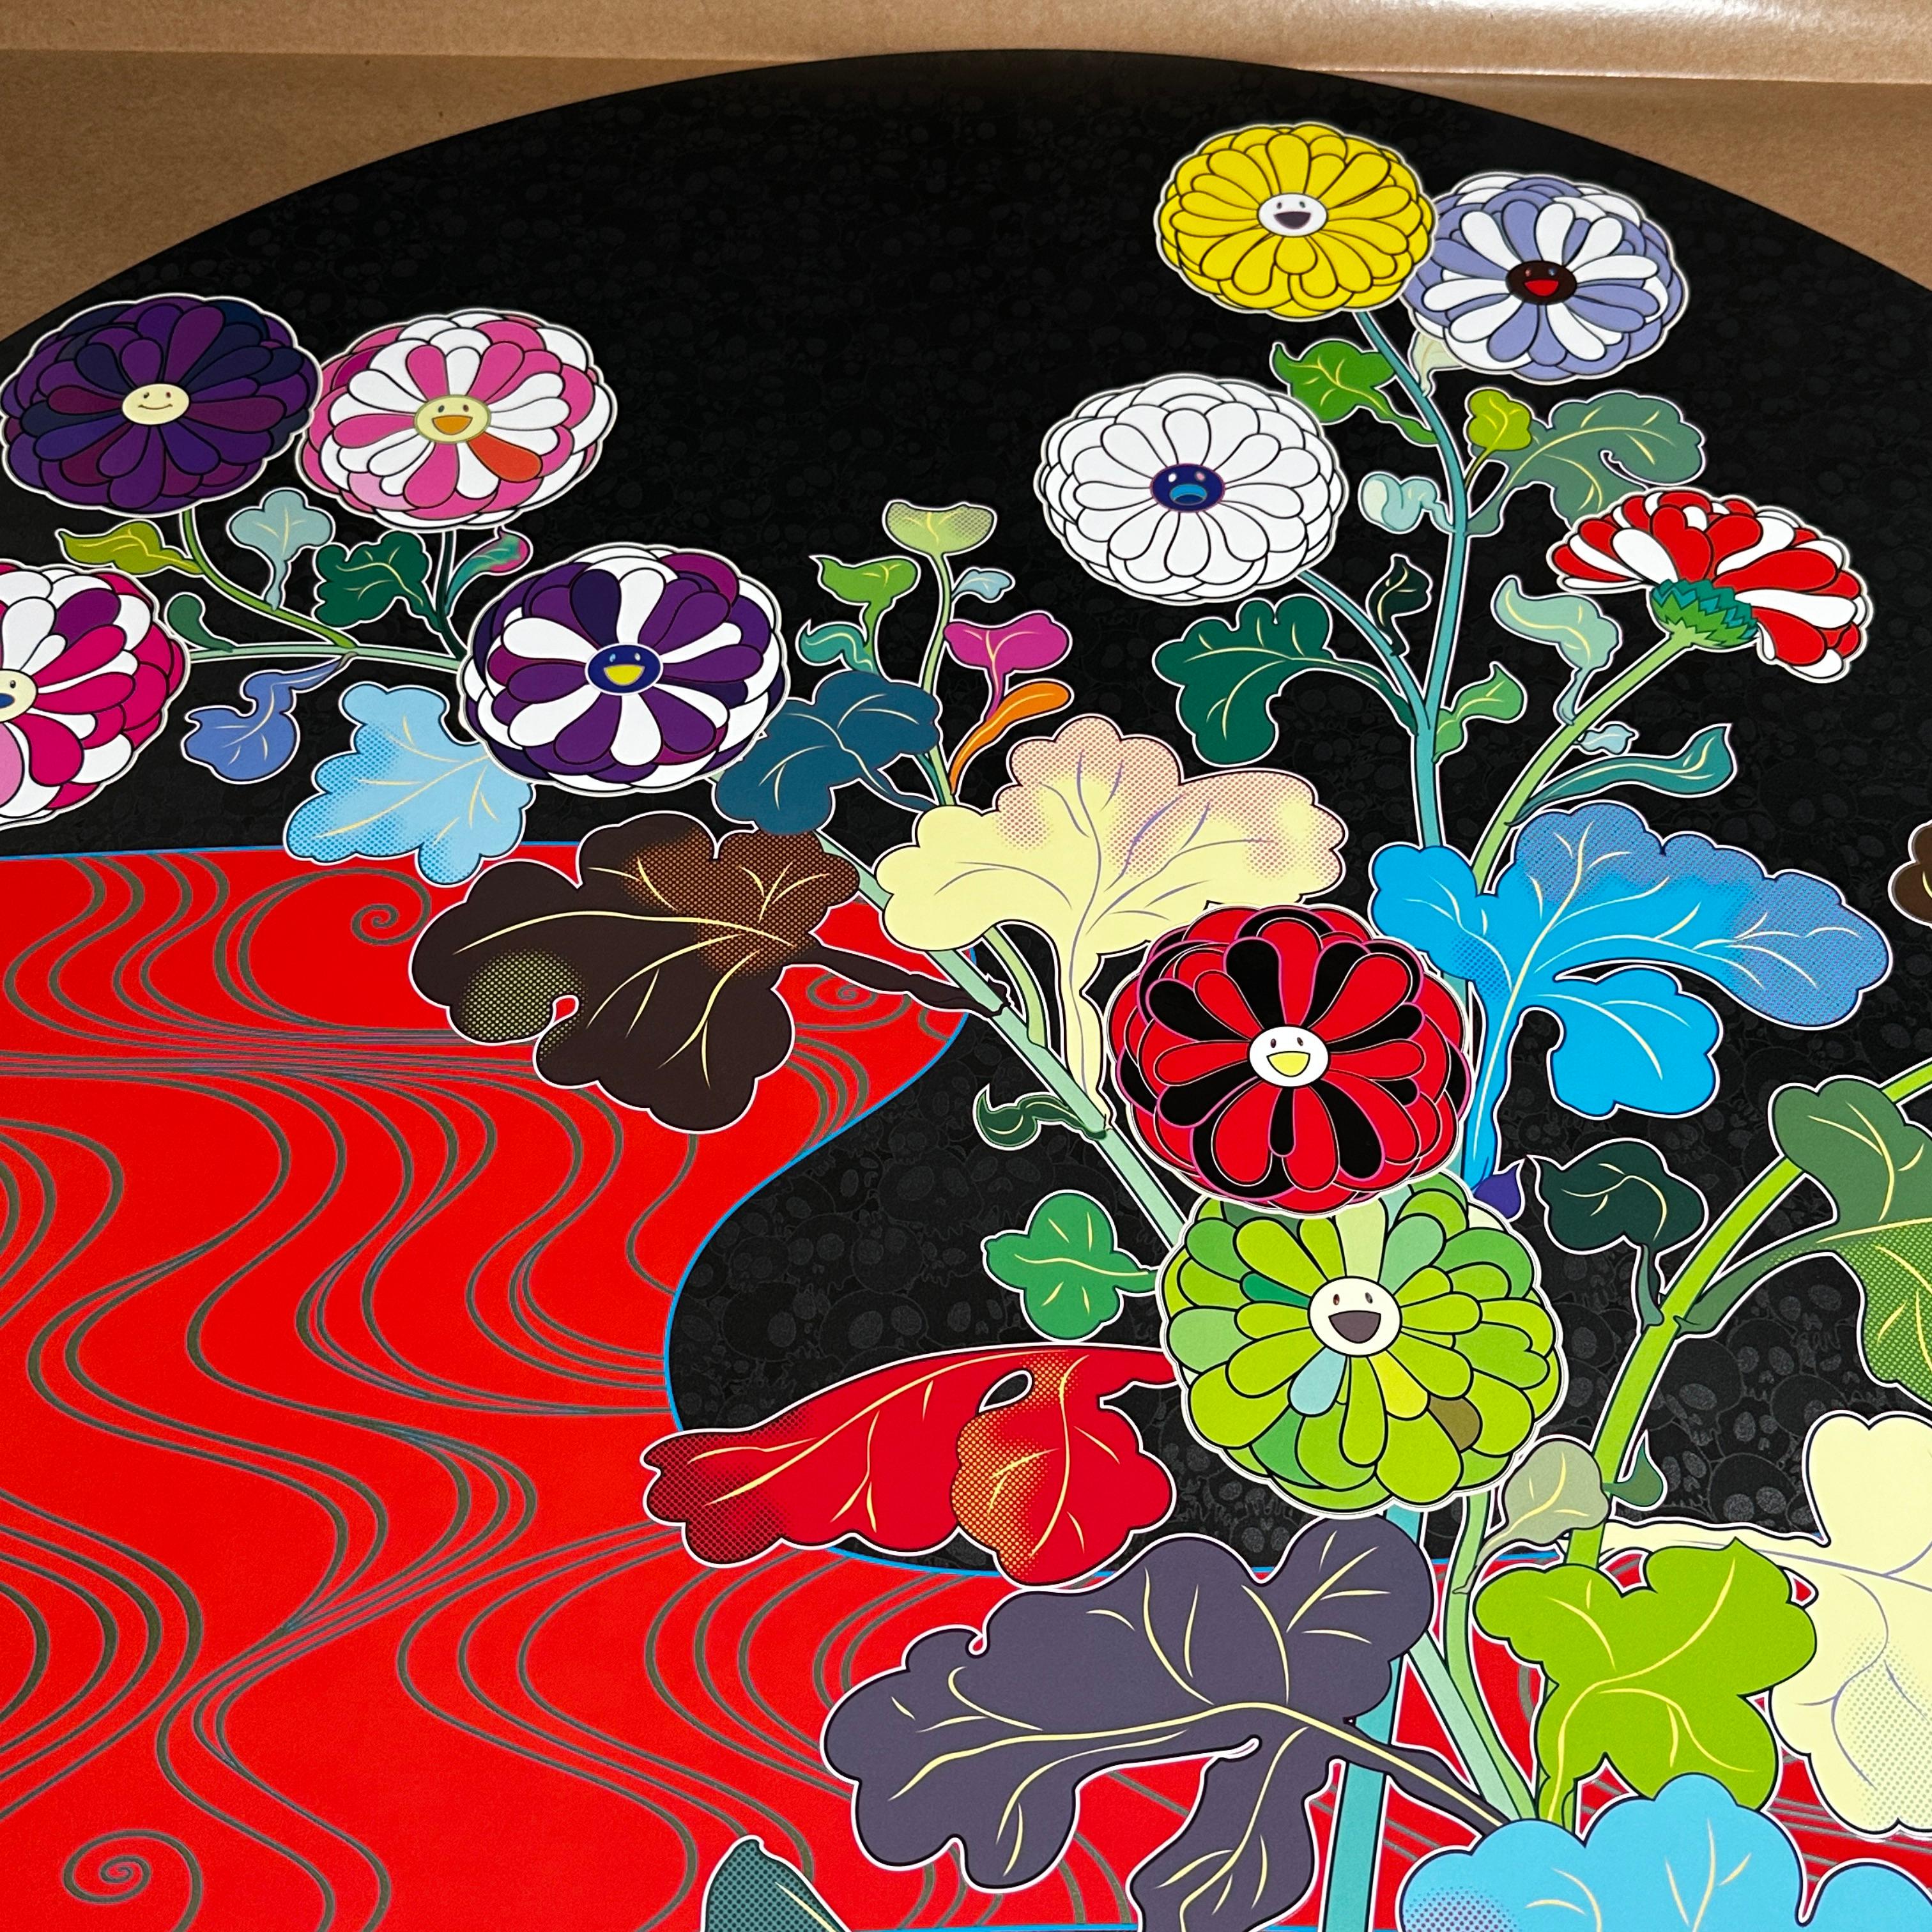 Flowers Blooming in the Isle of the Dead (Takashi Murakami, Tokyo, Flowers) 2